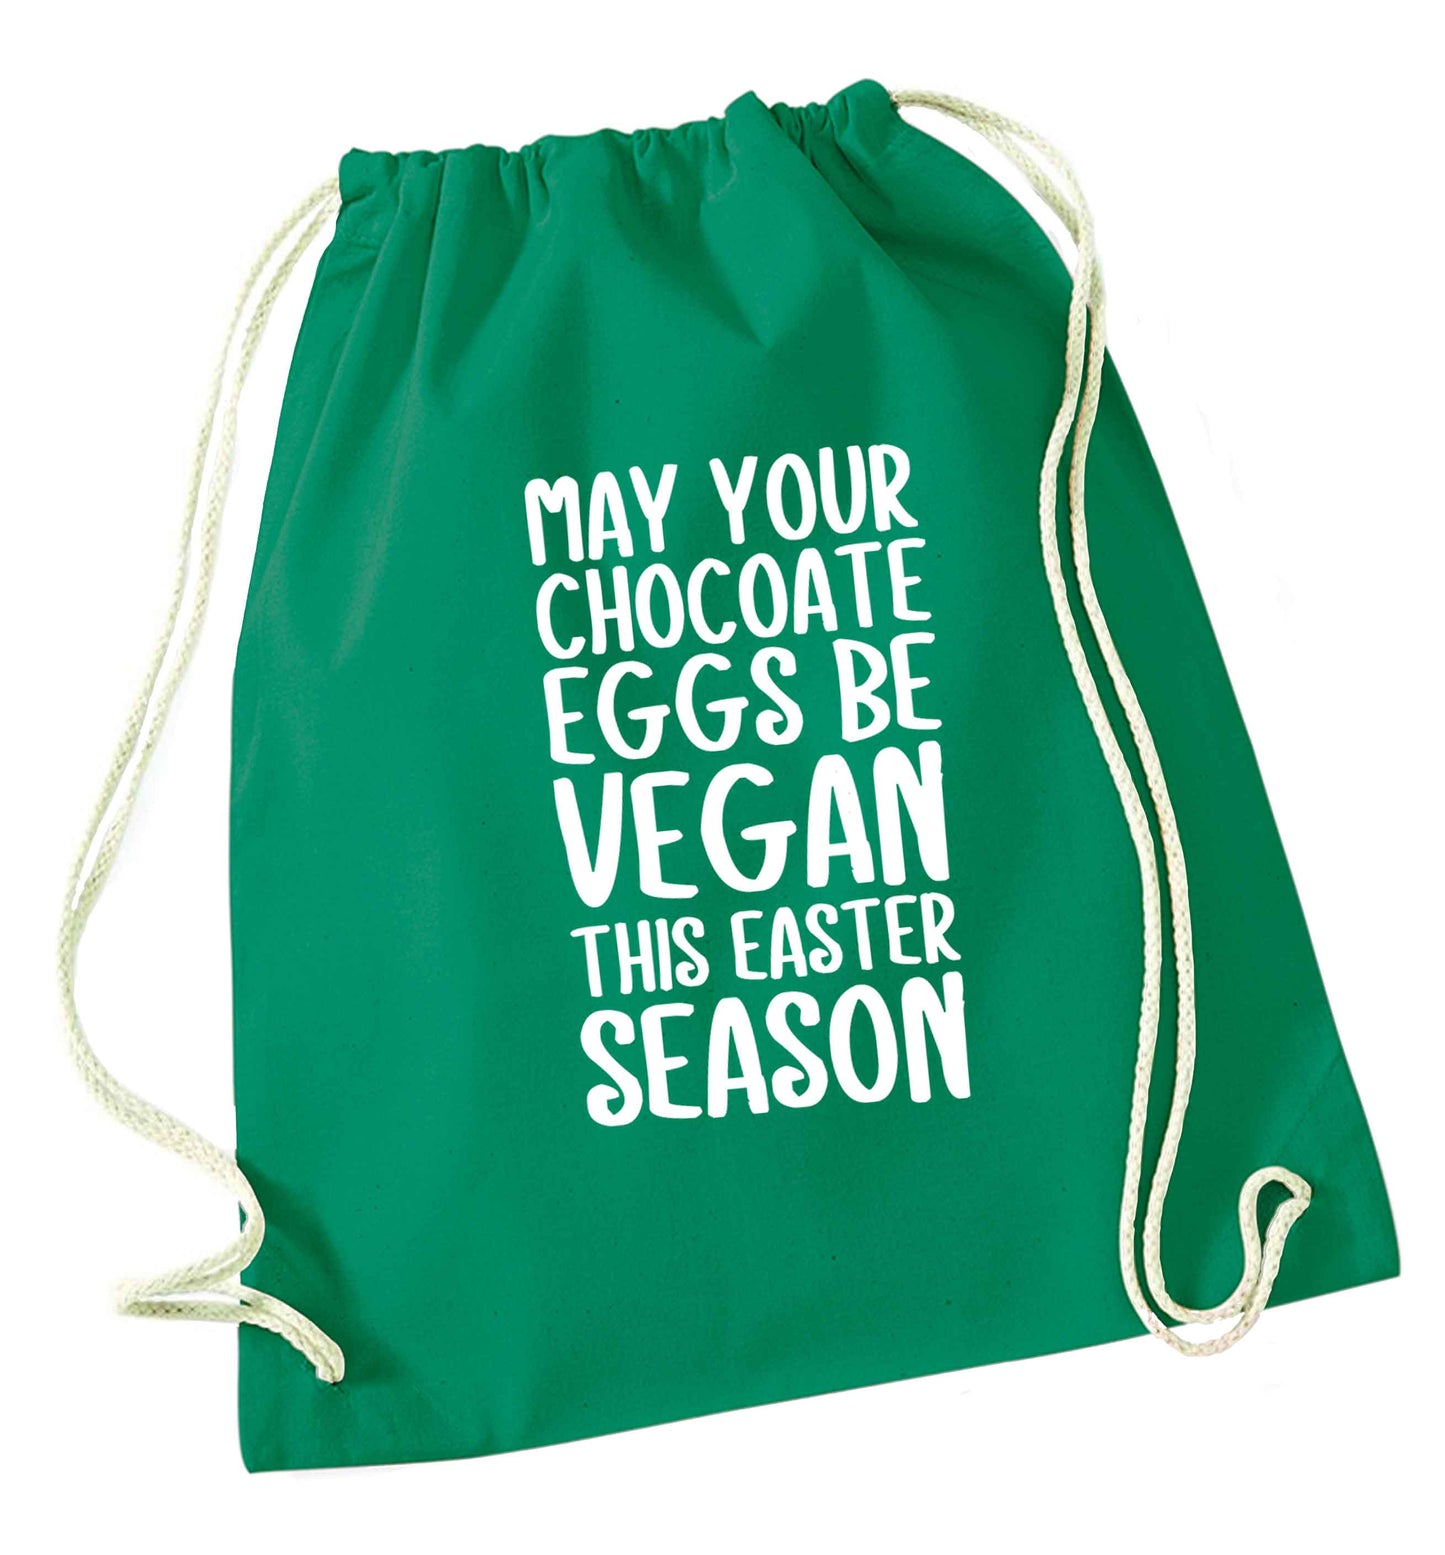 Easter bunny approved! Vegans will love this easter themed green drawstring bag